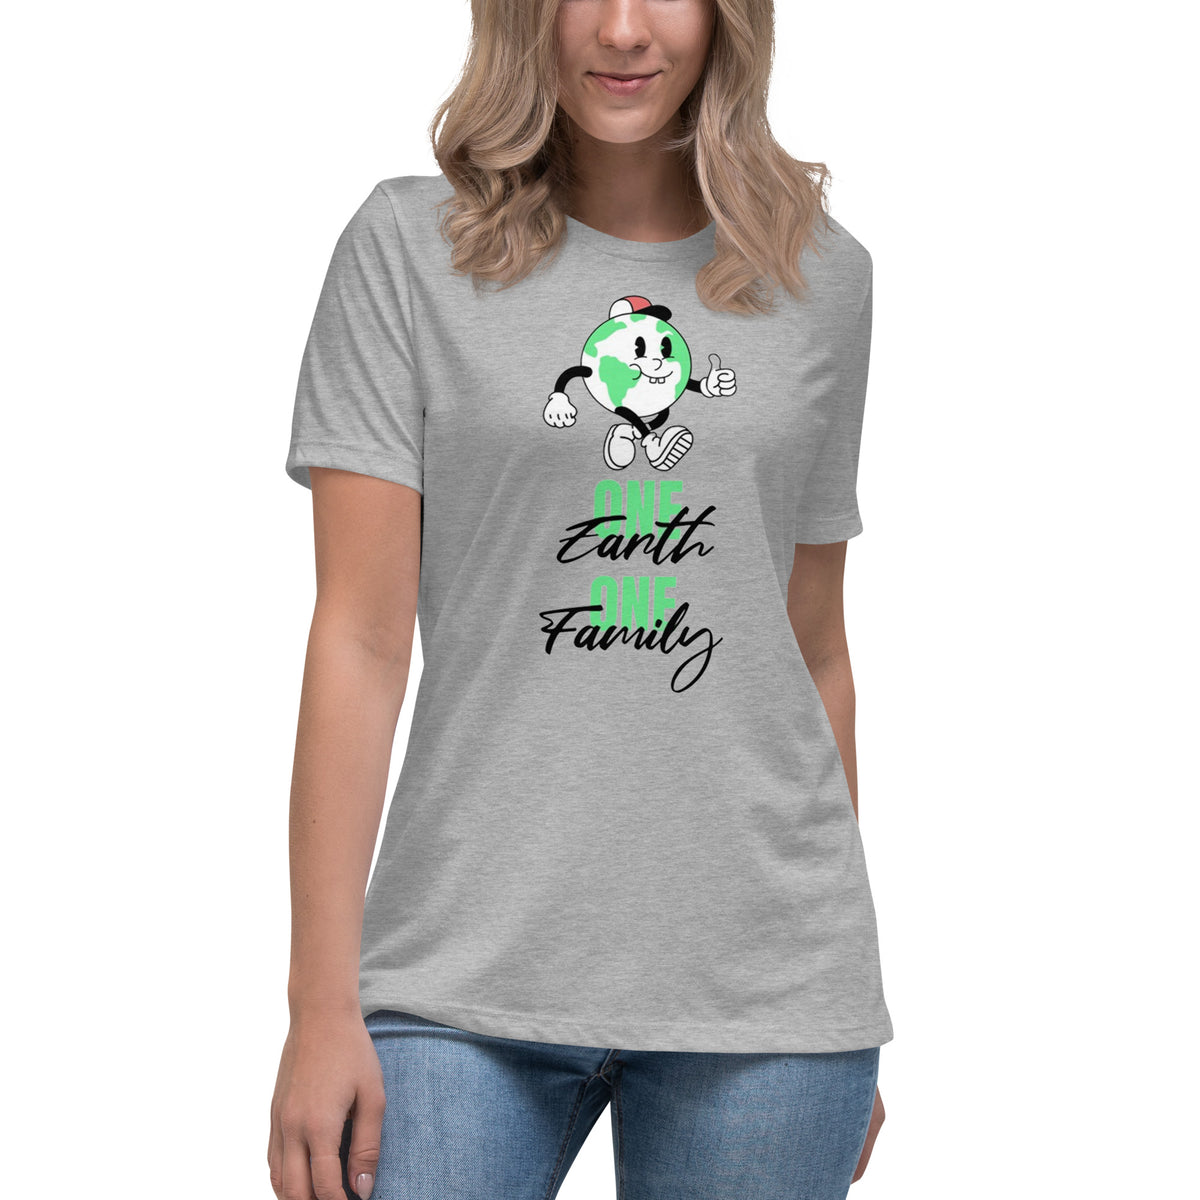 One Earth One Family T-Shirts